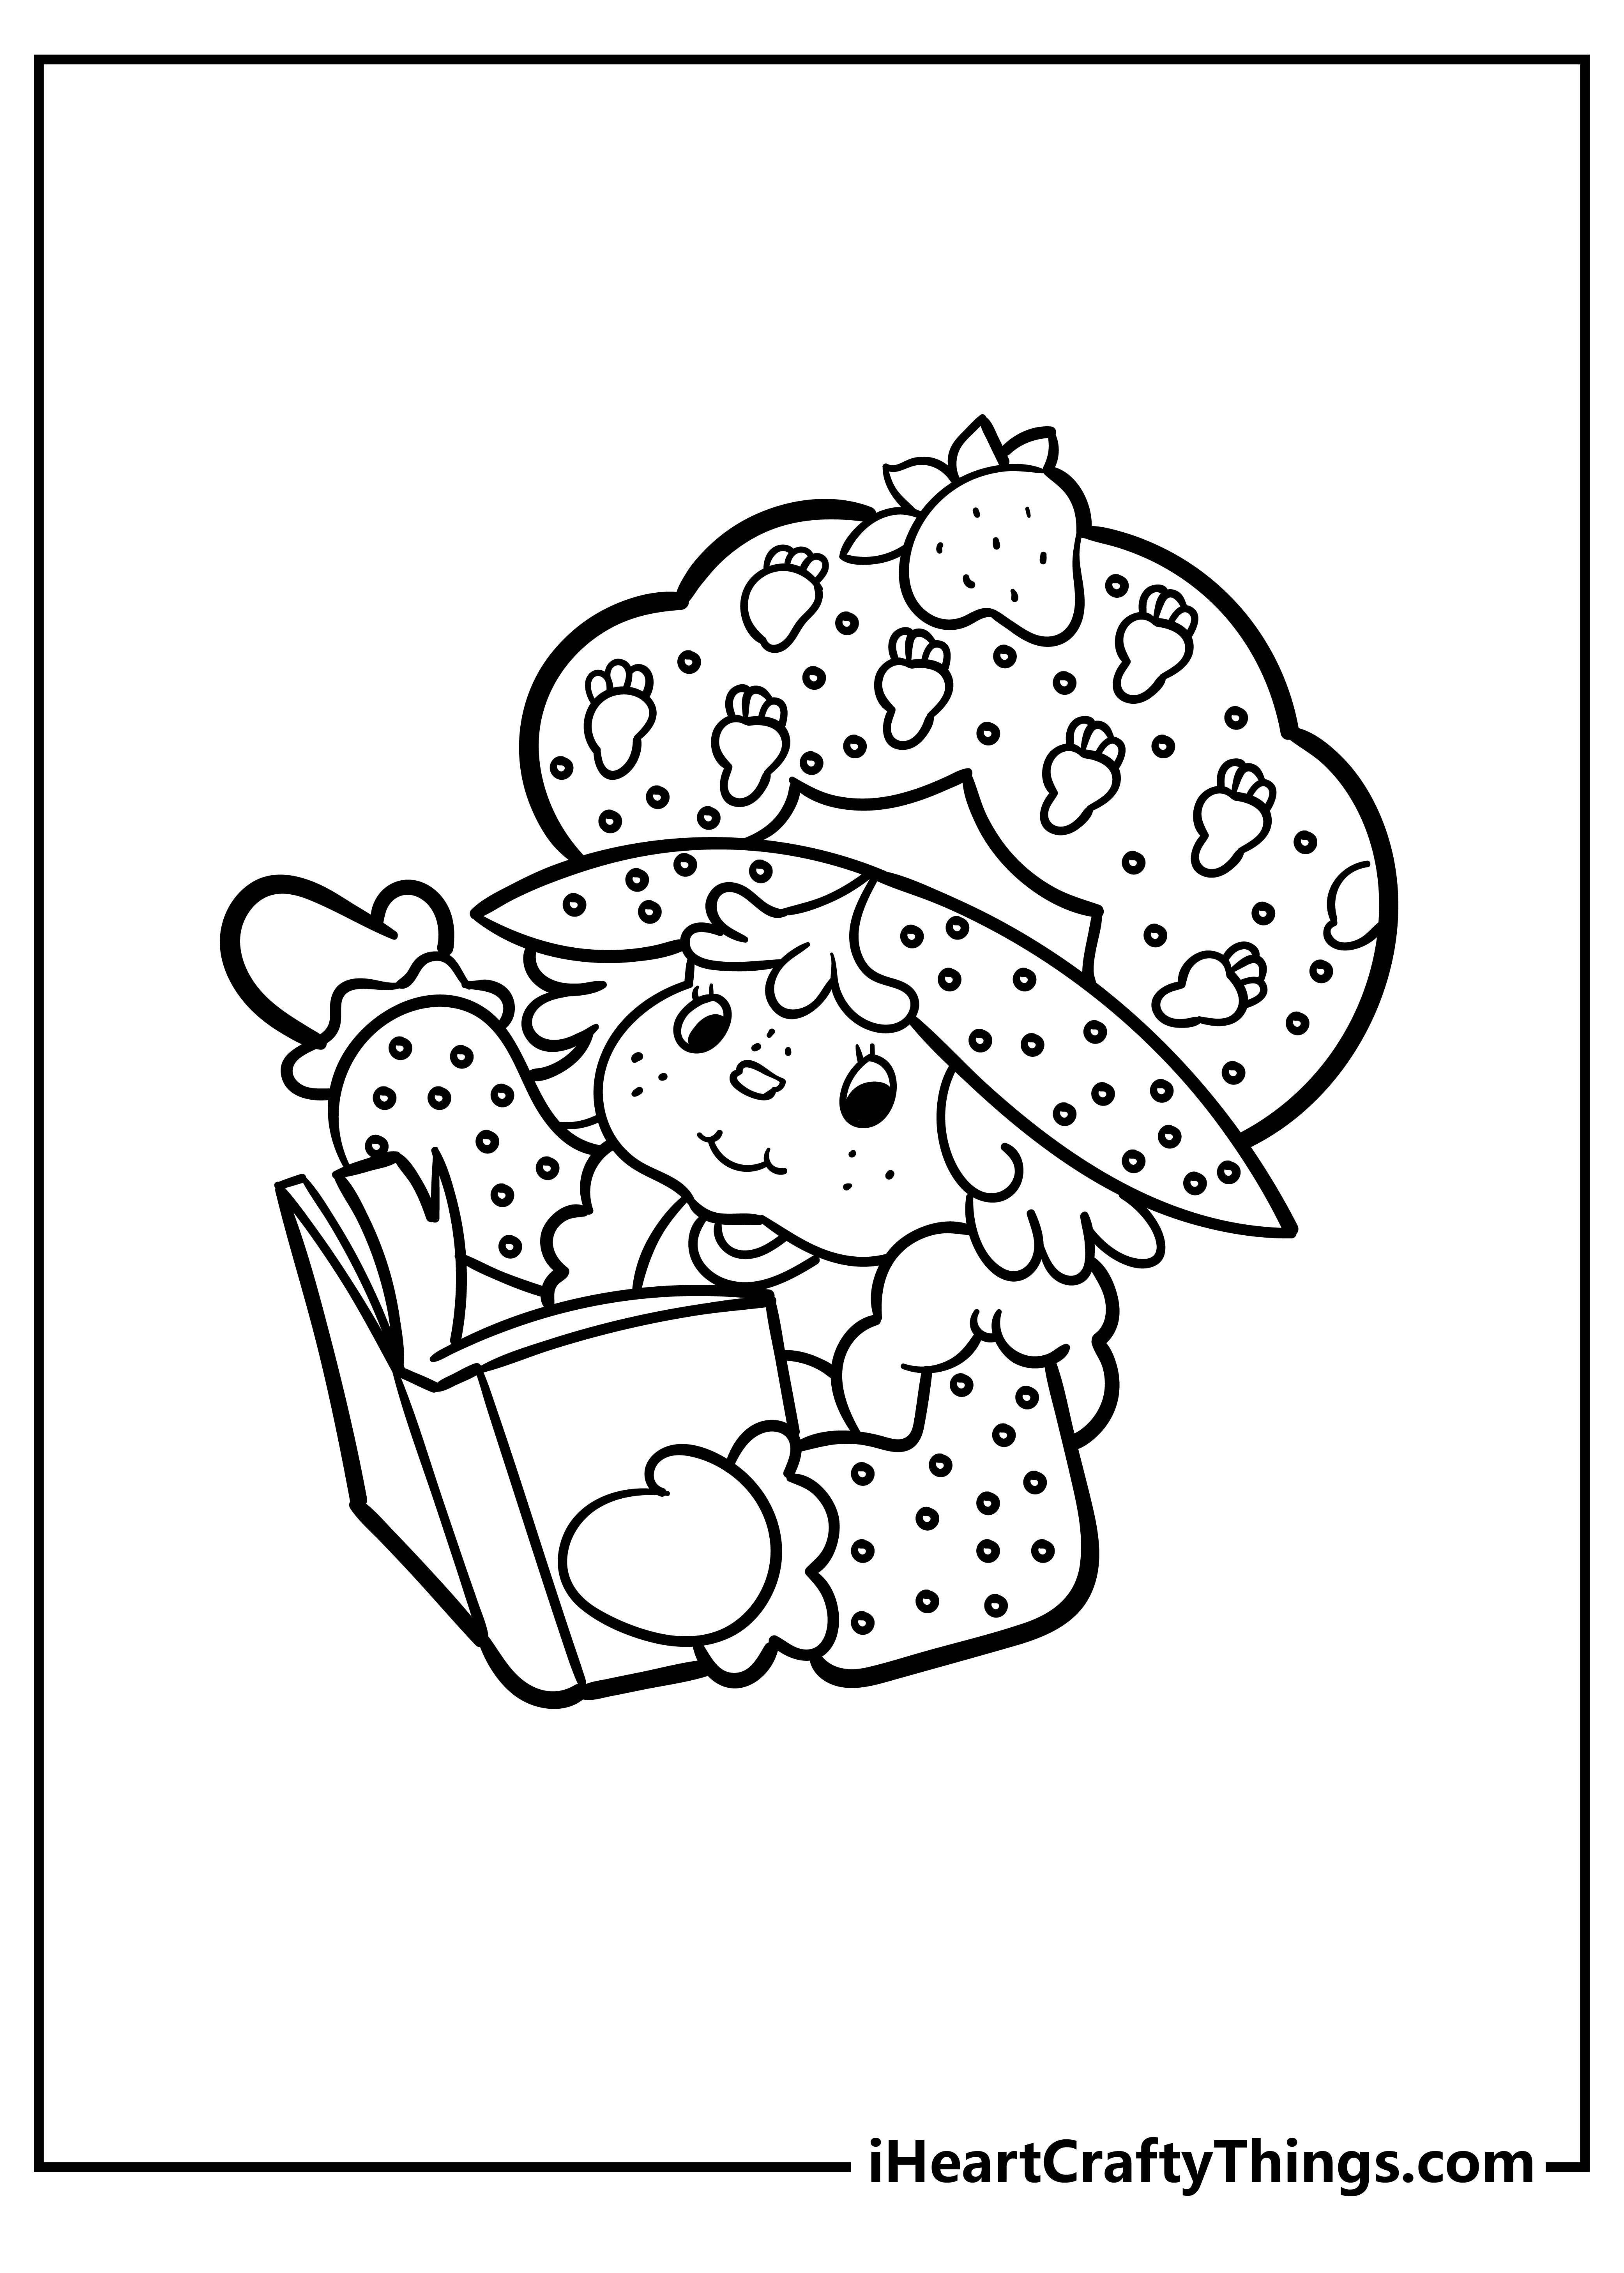 Strawberry Shortcake Coloring Sheet for children free download